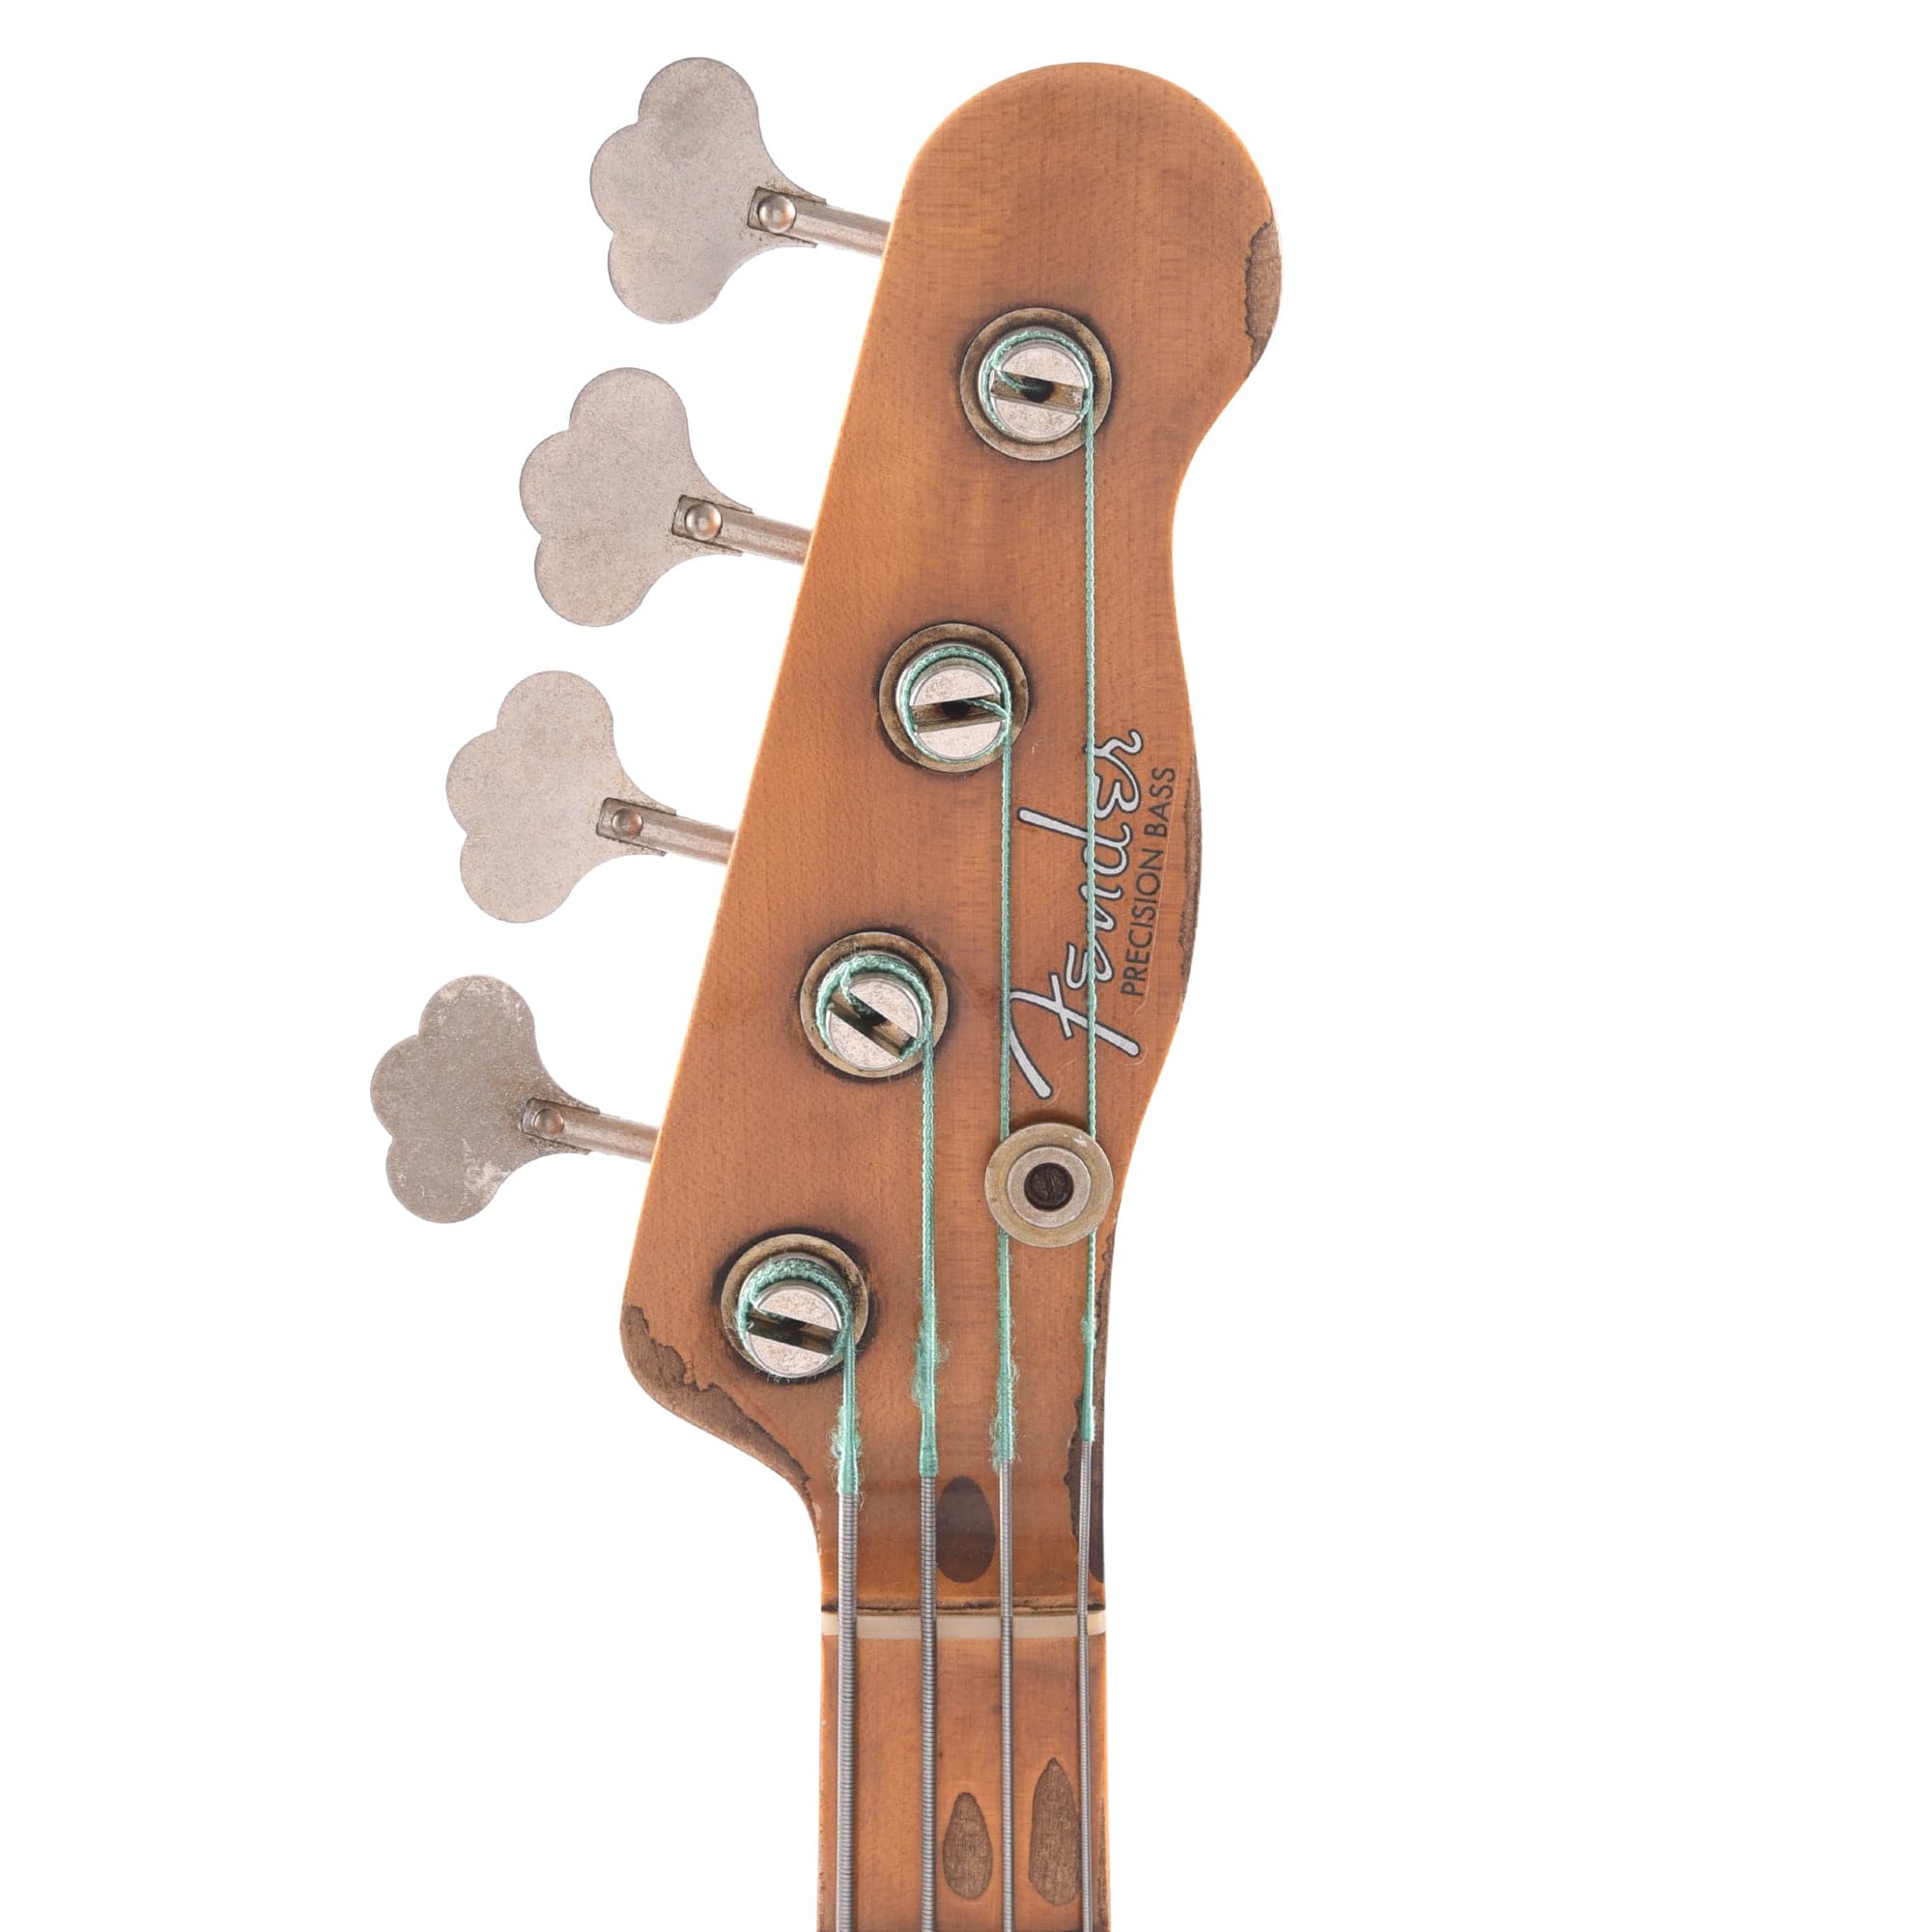 Fender Custom Shop Limited Edition 1951 Precision Bass Super Heavy Relic Aged Nocaster Blonde Bass Guitars / 4-String